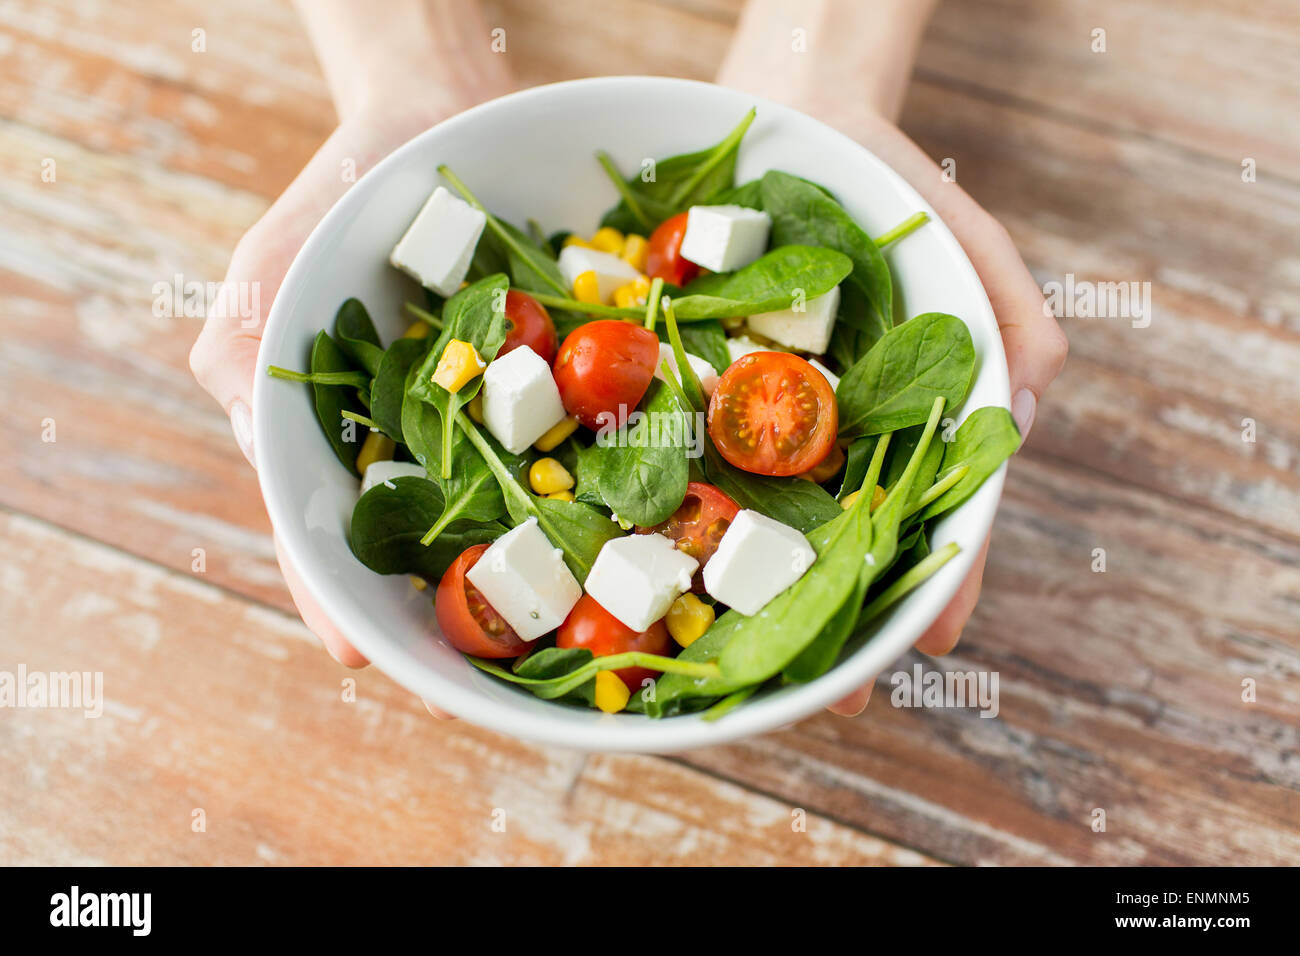 close up of young woman hands showing salad bowl Stock Photo